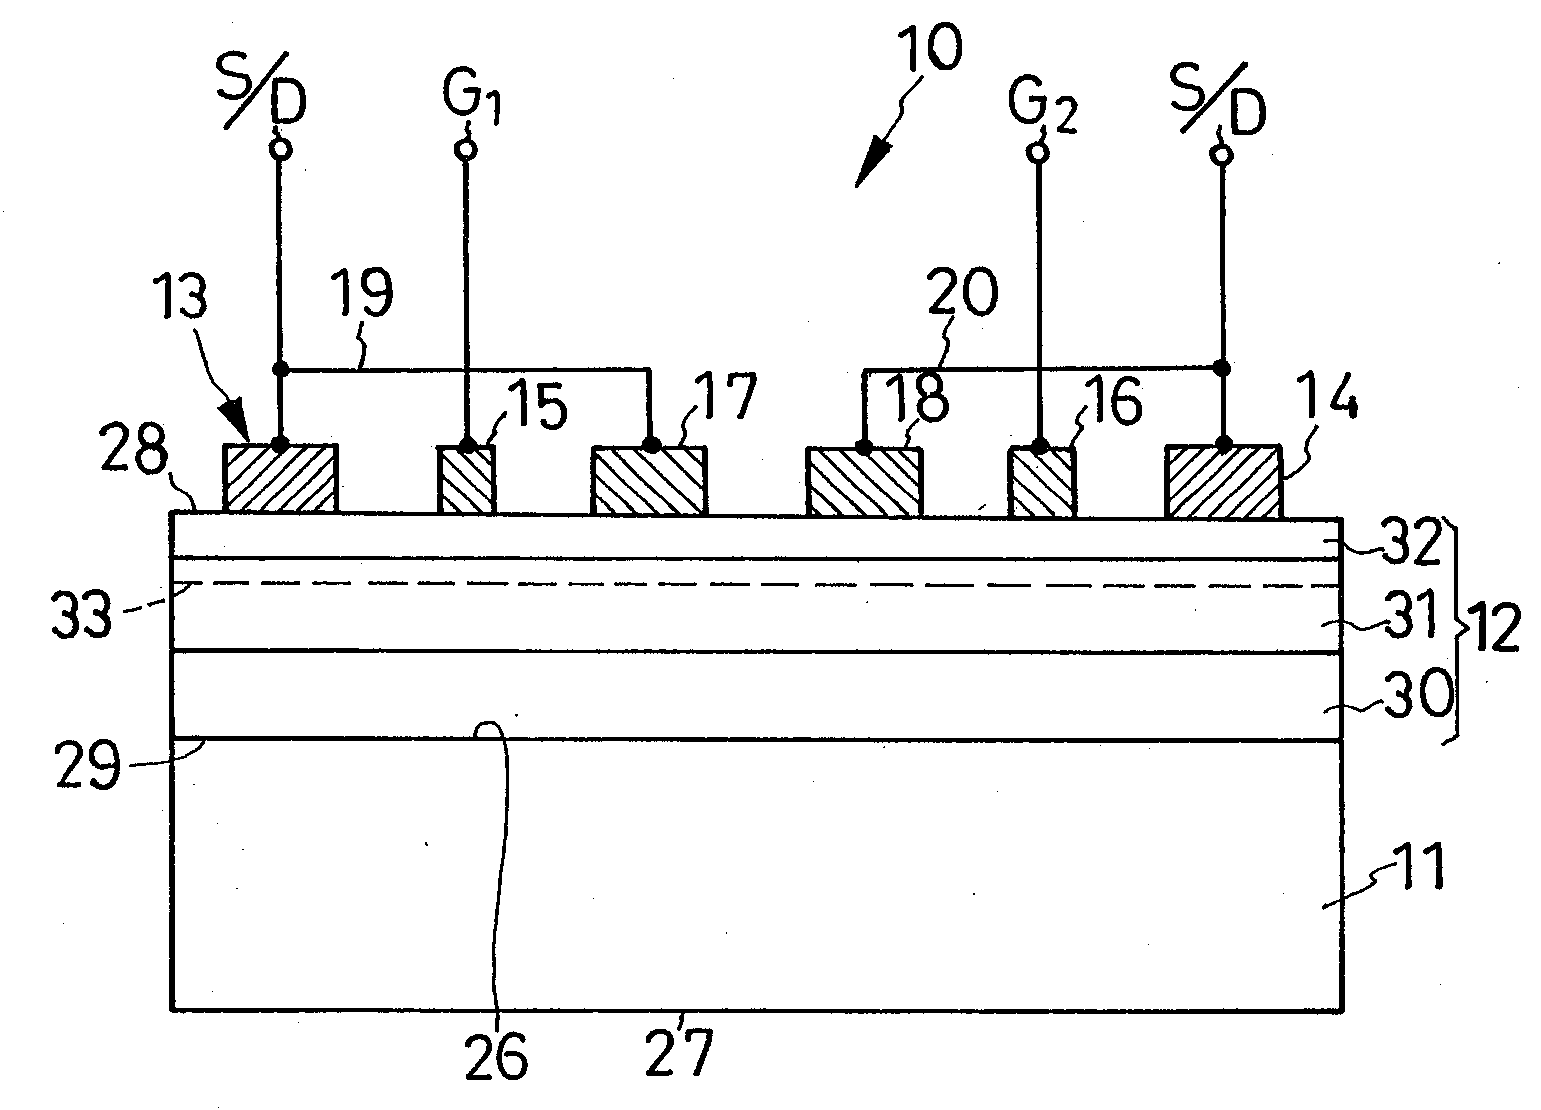 Solid-state switch capable of bidirectional operation